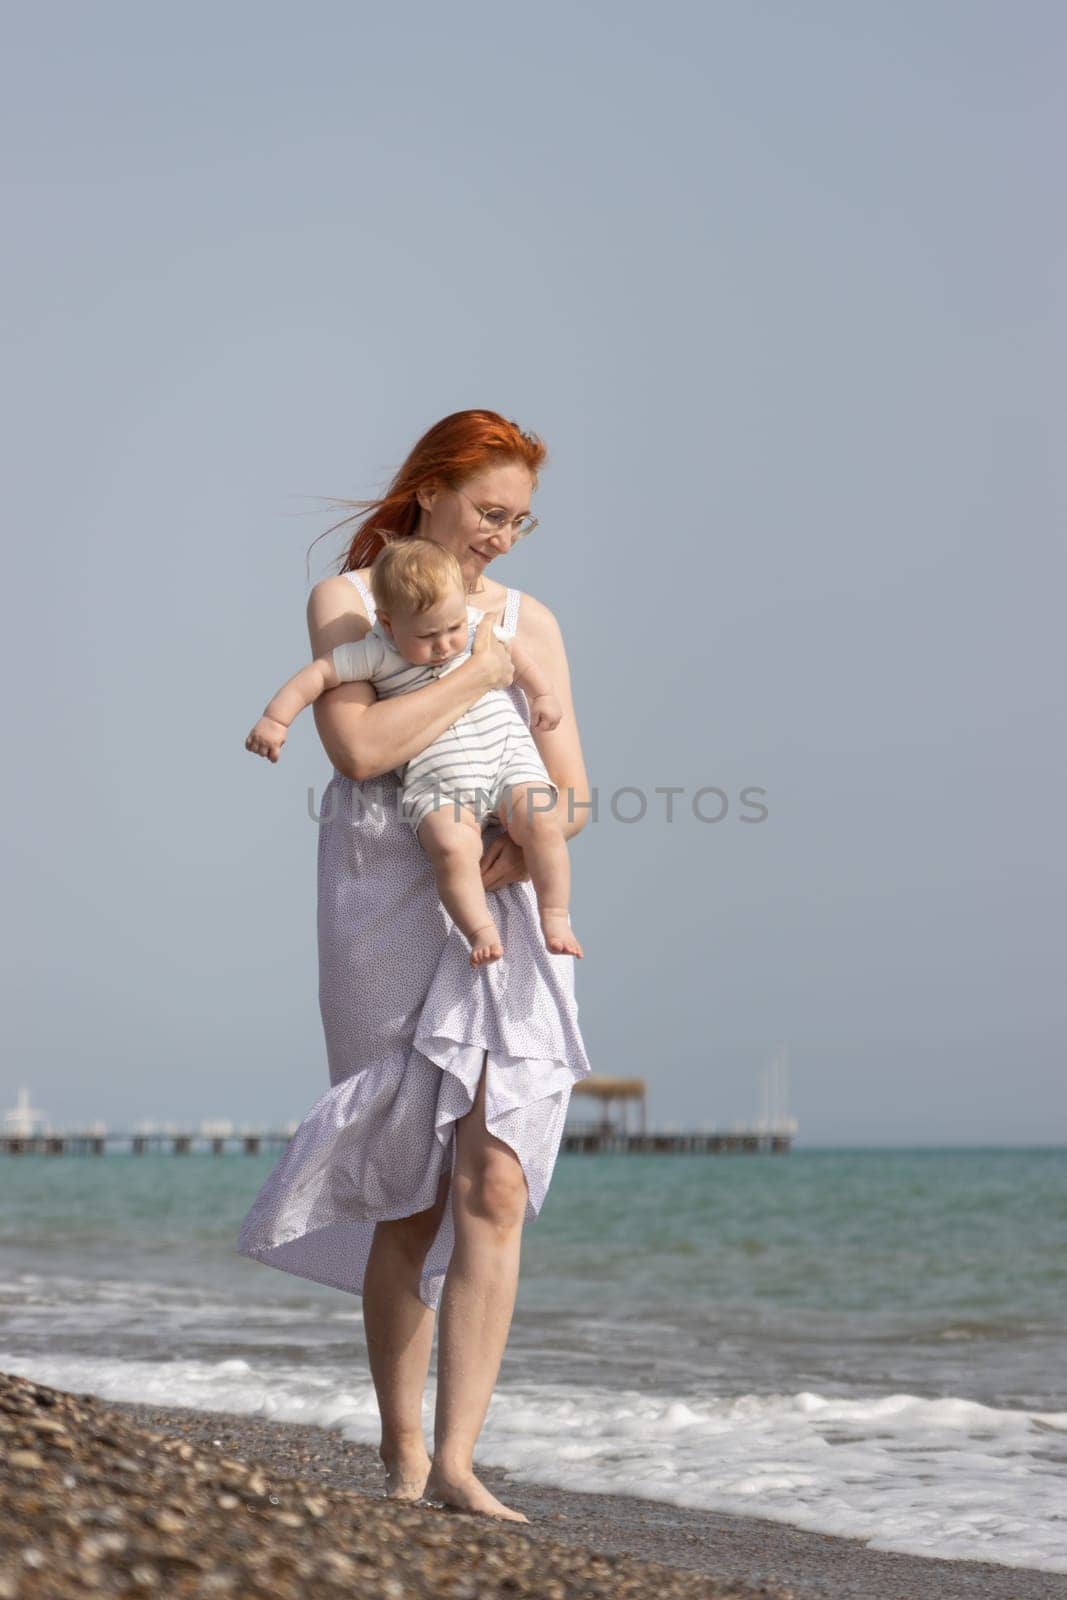 Smiling woman walking on a beach with her little son. Mid shot